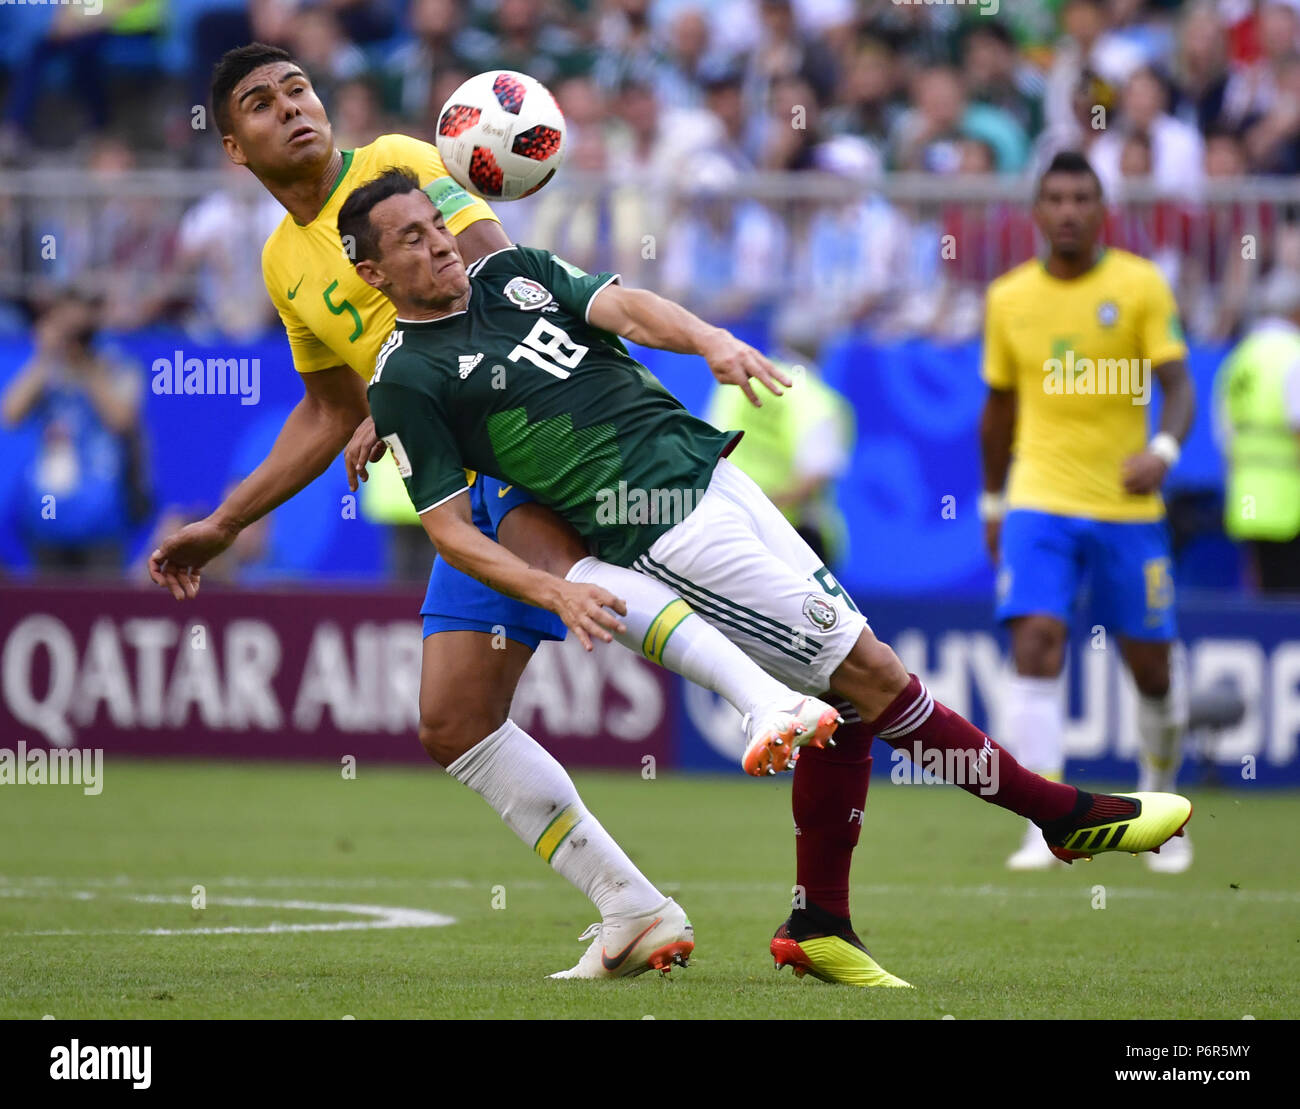 Samara, Russia. 2nd July, 2018. Casemiro (top) of Brazil vies with Andres Guardado of Mexico during the 2018 FIFA World Cup round of 16 match between Brazil and Mexico in Samara, Russia, July 2, 2018. Brazil won 2-0 and advanced to the quarter-final. Credit: Chen Yichen/Xinhua/Alamy Live News Stock Photo